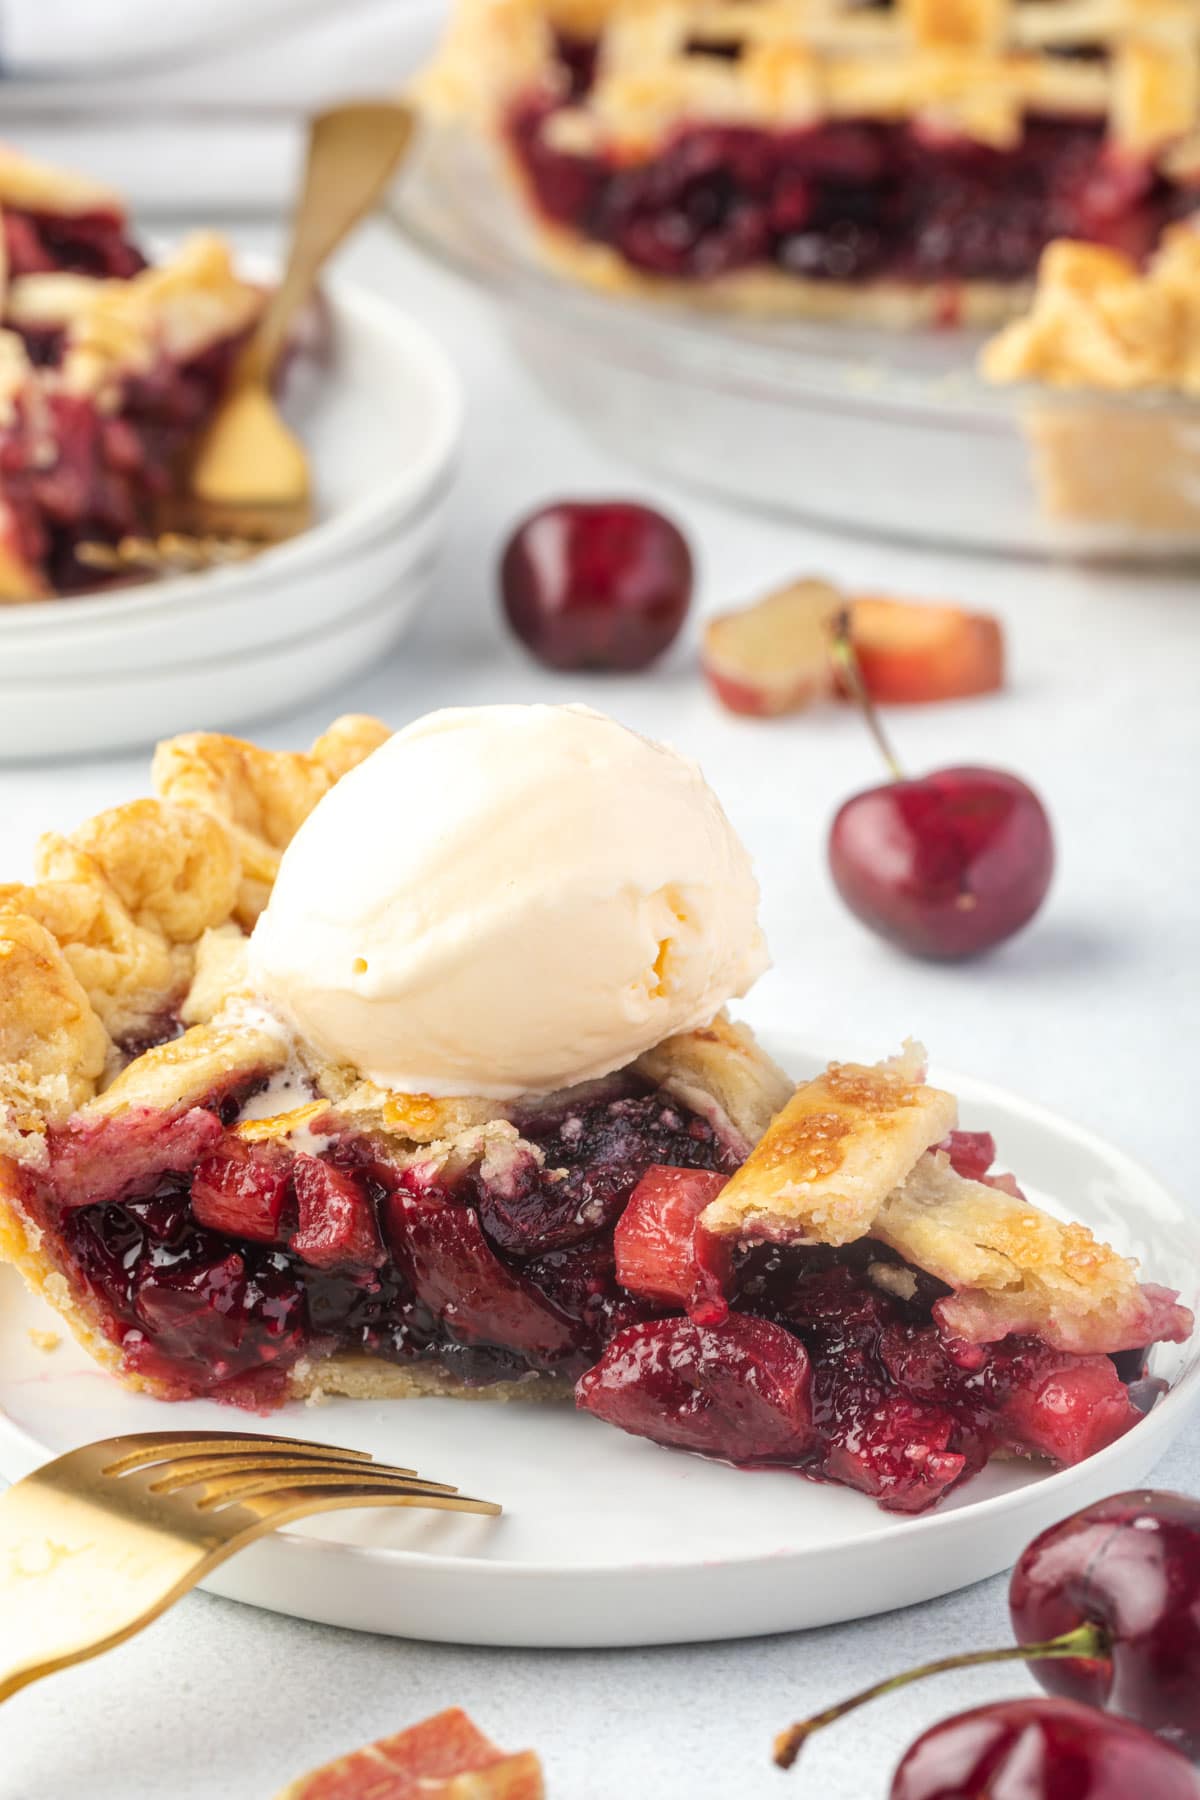 Slice of rhubarb cherry pie on a plate with a scoop of ice cream and whole pie in background.